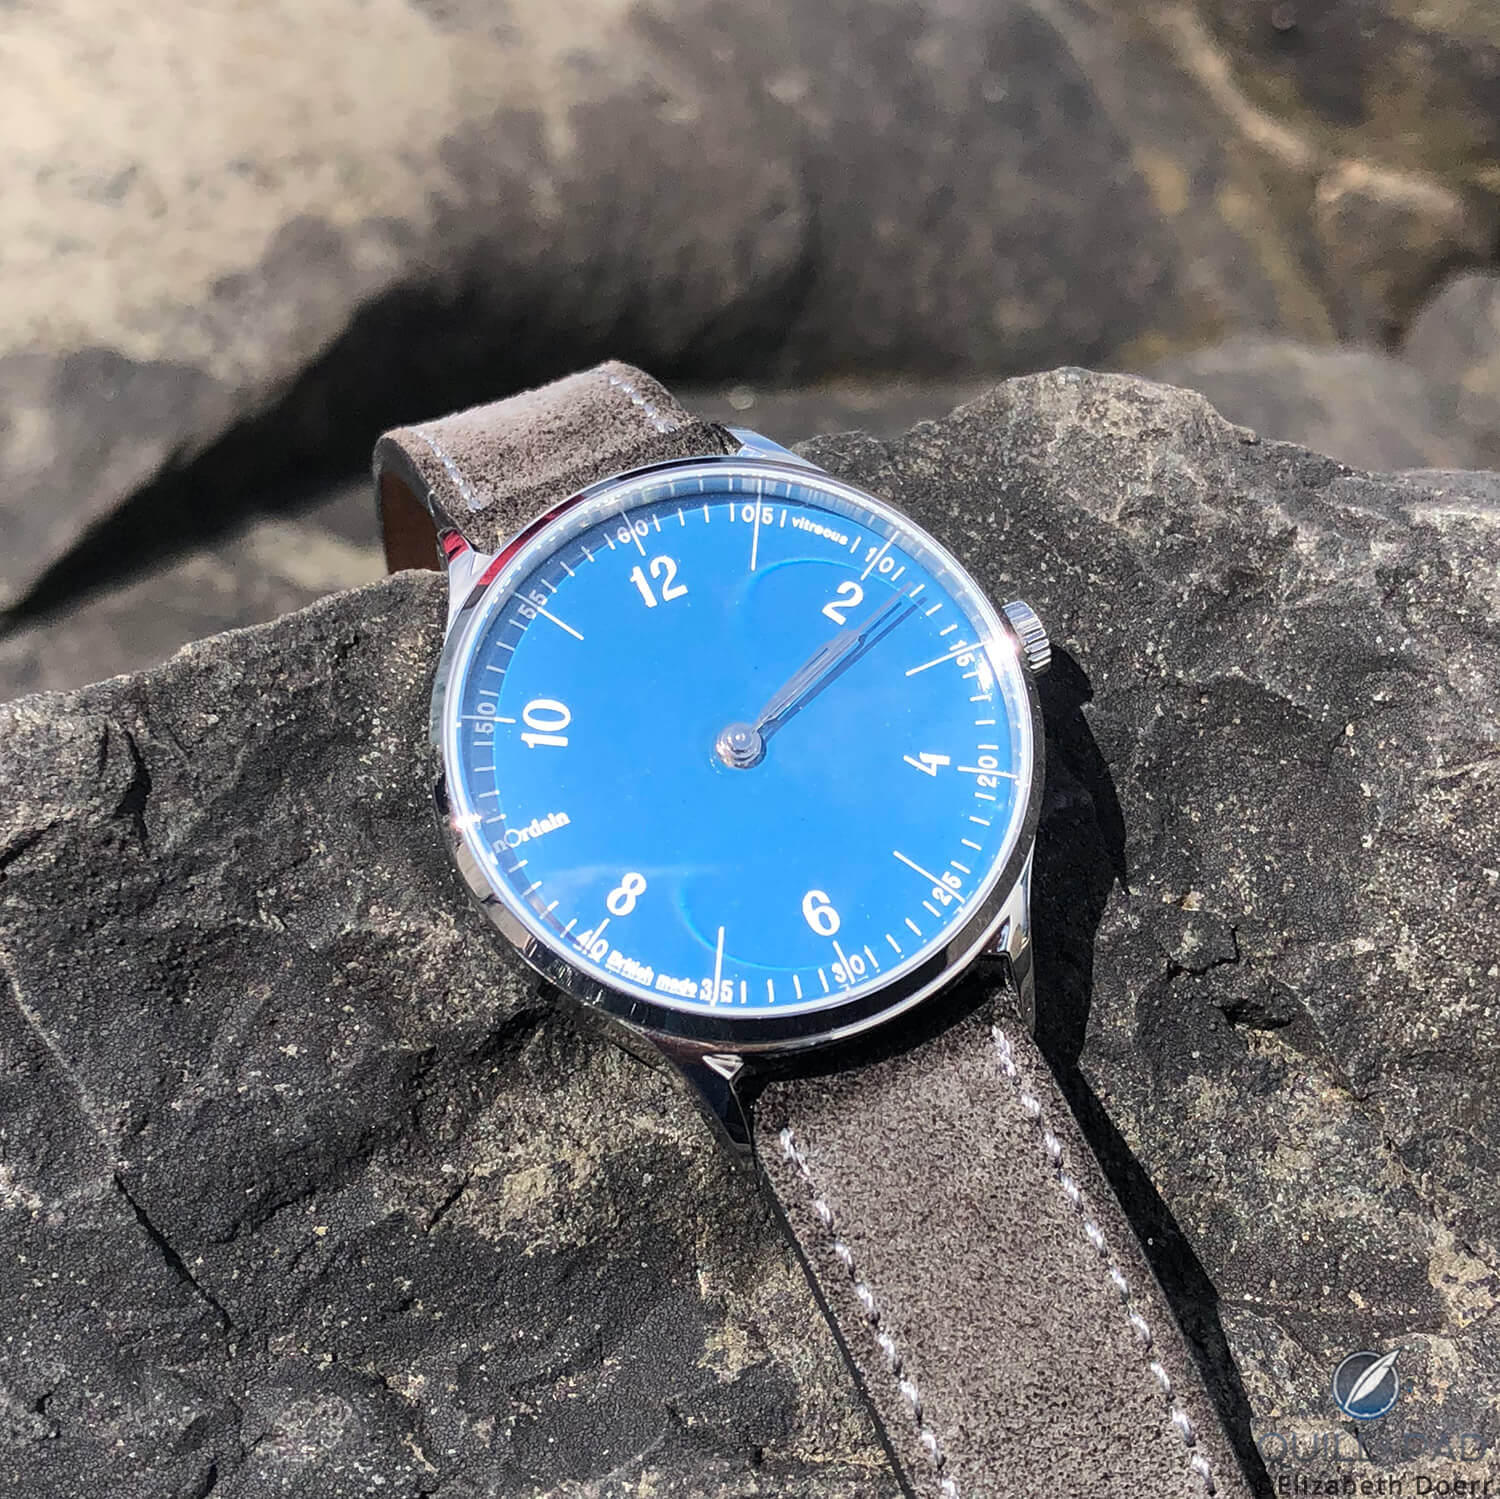 anOrdain Model 1 with blue oven-fired enamel dial